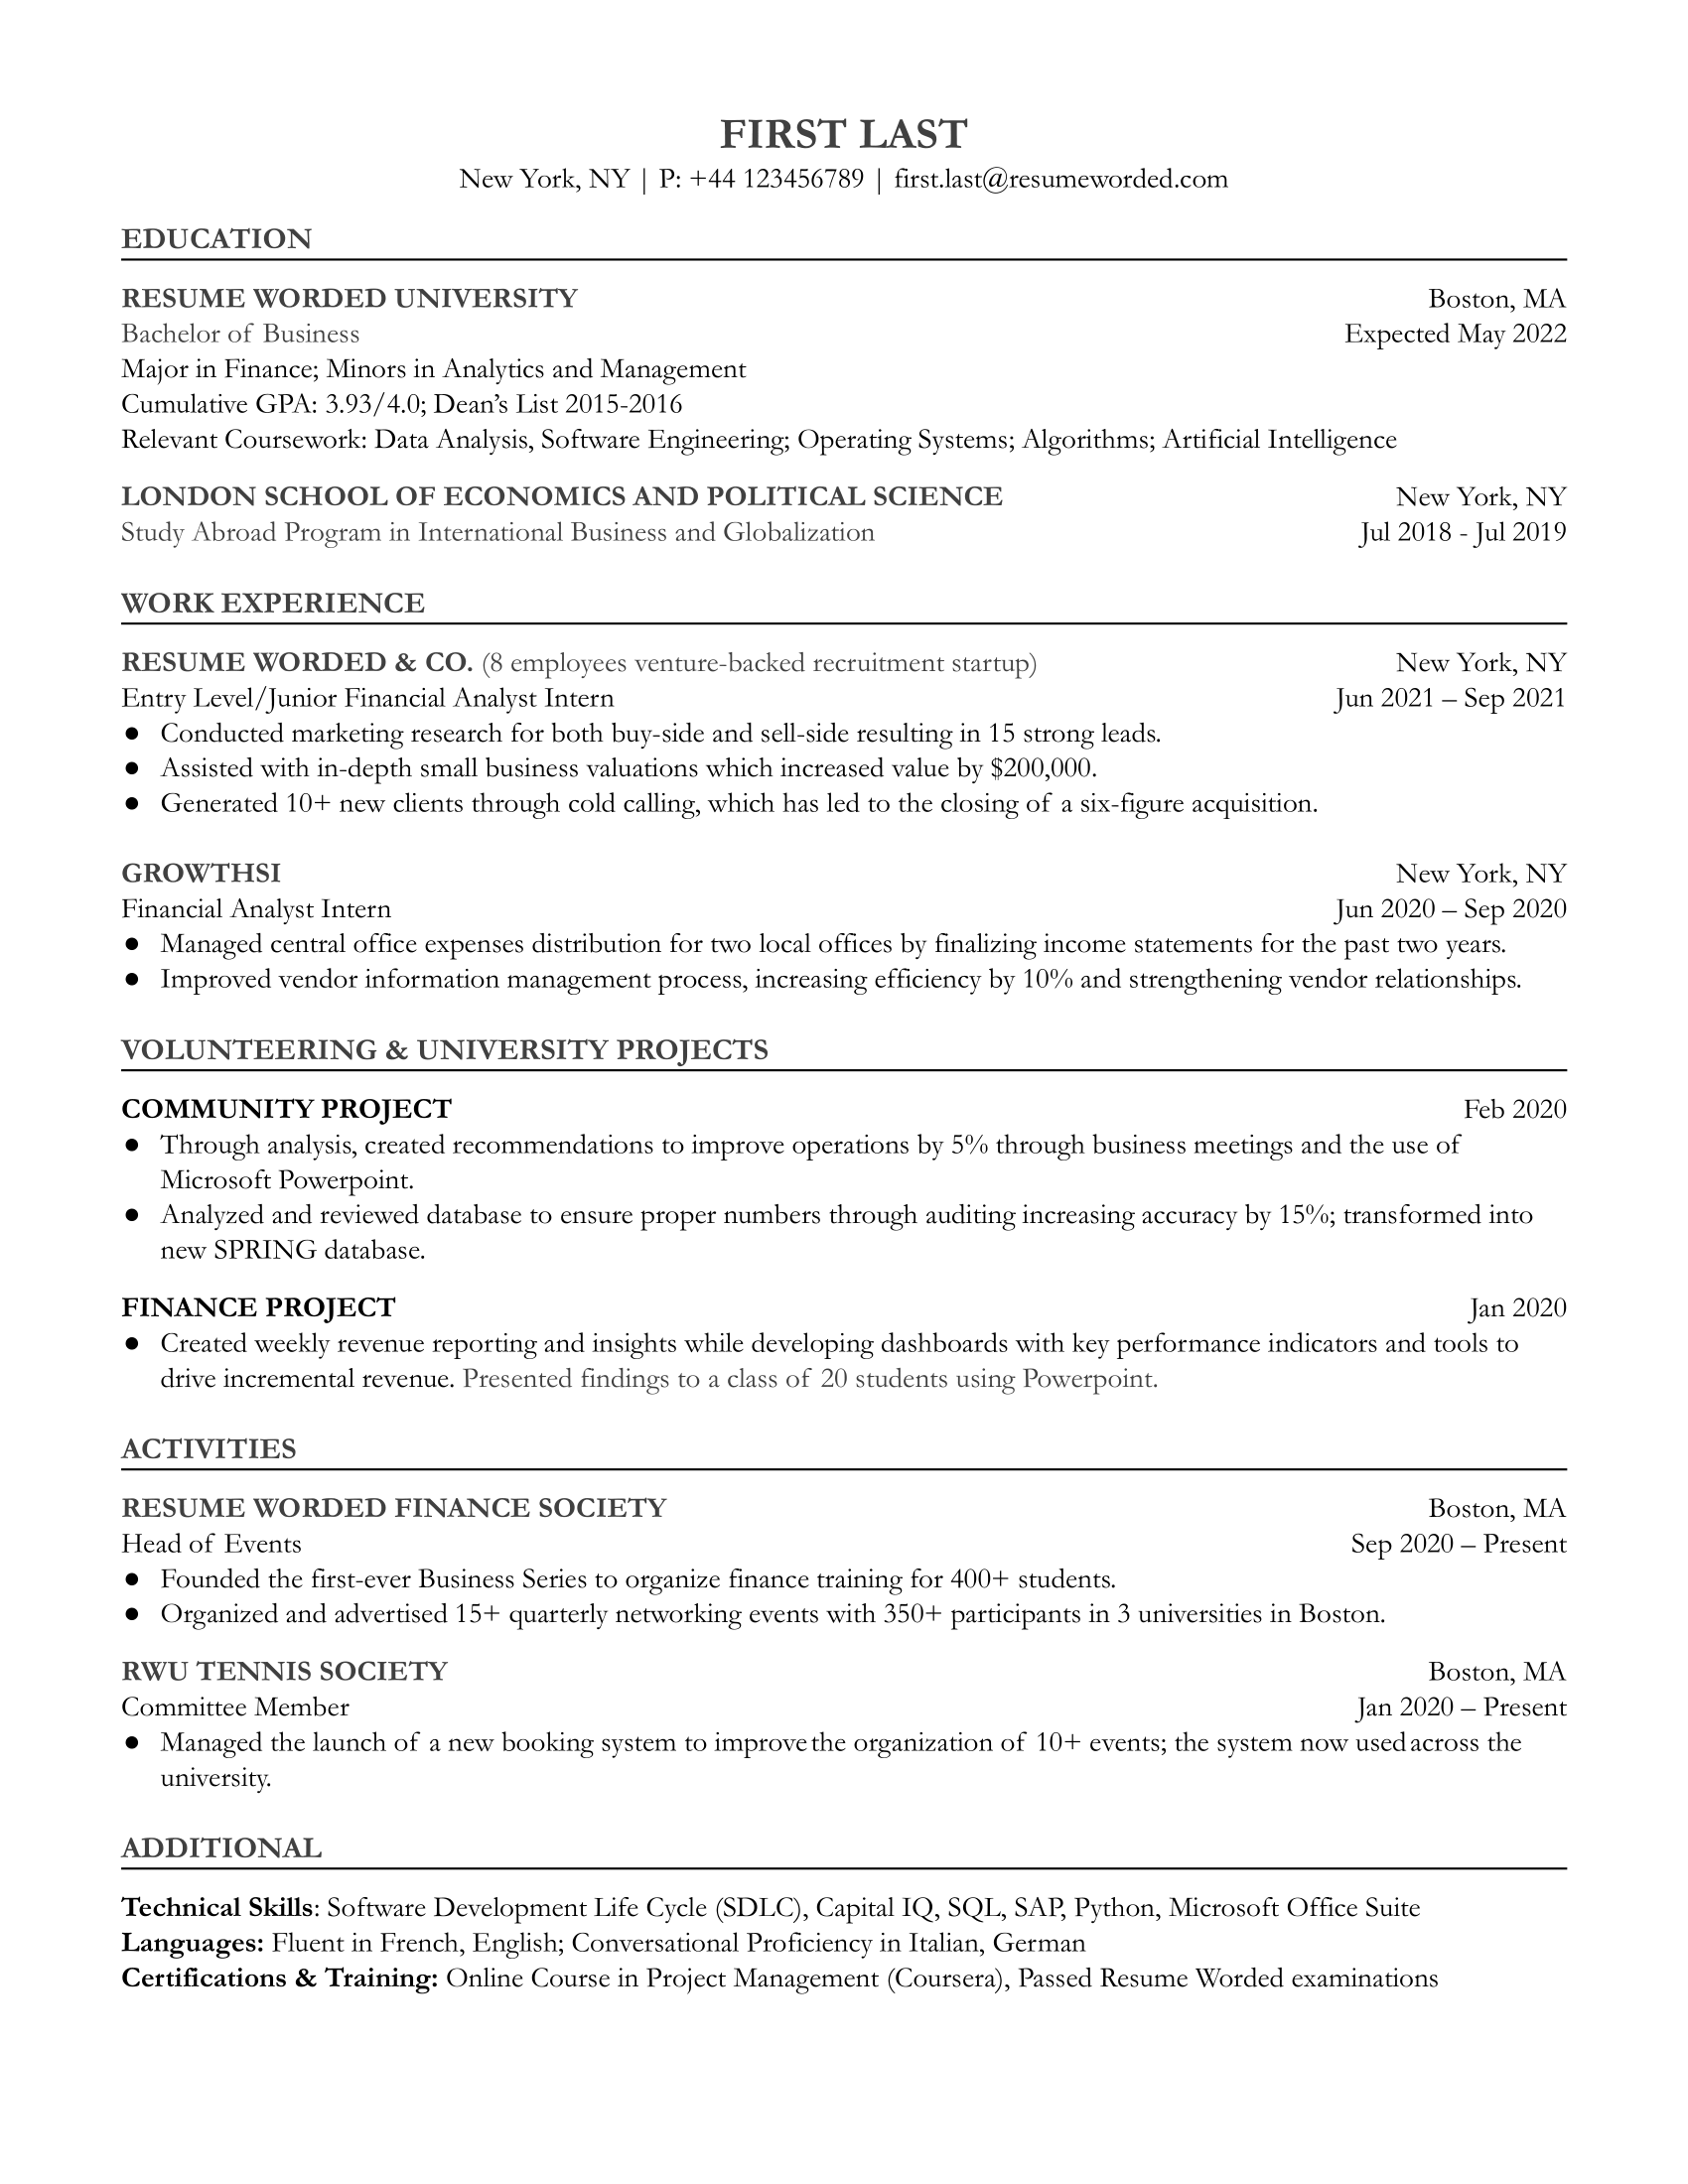 Junior financial analyst resume with educational history and internship experience